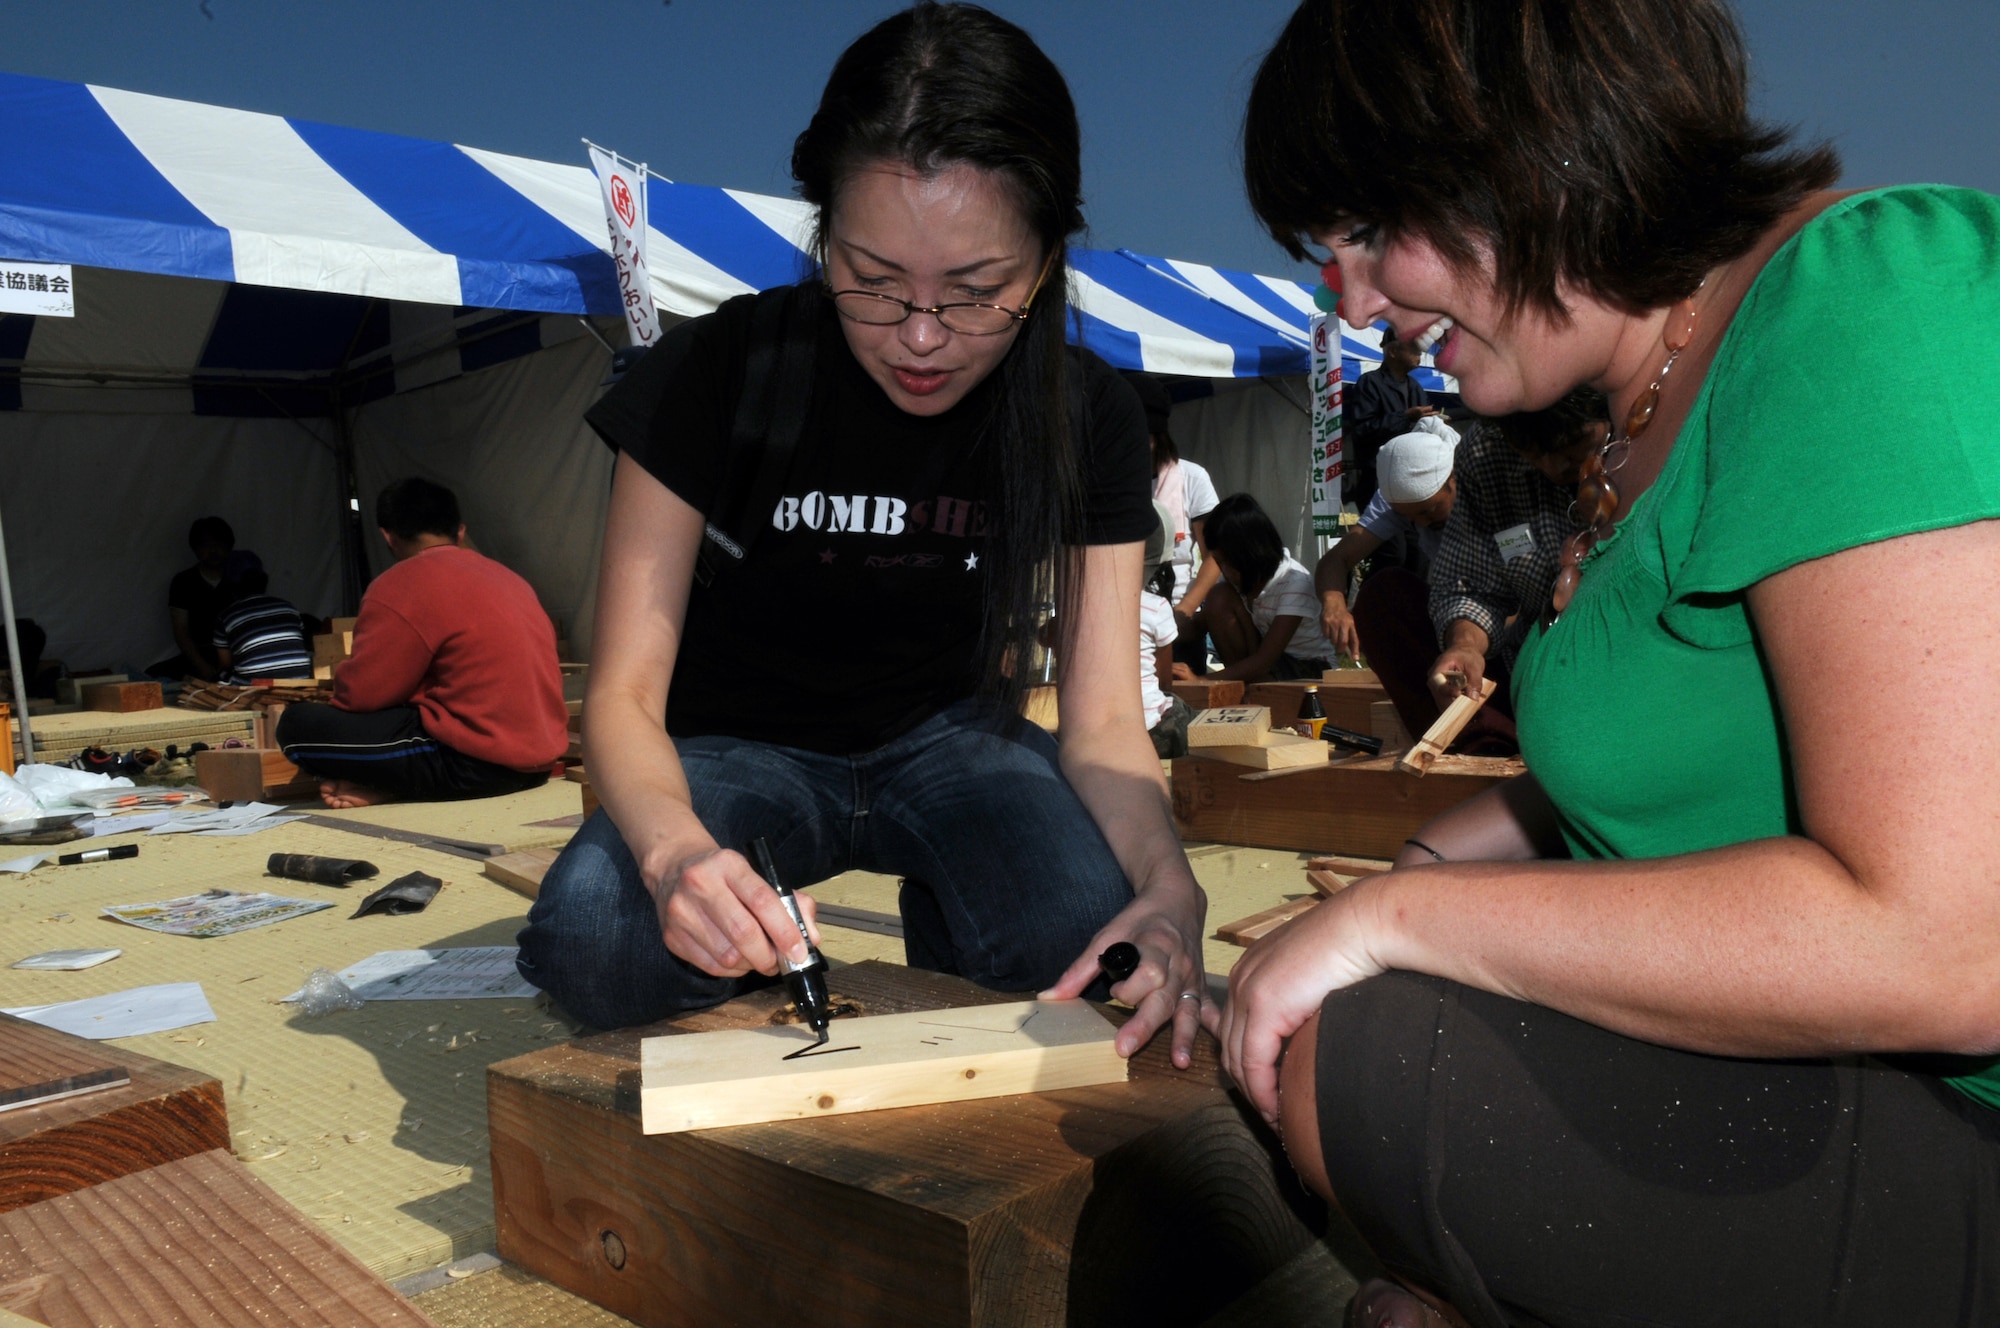 Mrs. Sayaka Higa, media relations specialist and Ms. Beth Gosselin, Chief of Public Affairs Operations, both at Kadena Air Base, Japan, try their wood-working skills at a local farm festival during their visit to Hyakuri Air Base, Japan, Oct. 04. The squadron is participating in an Aviation Training Relocation exercise between the U.S. Air Force and the Japan Air Self Defense Force from Oct. 5-9, 2009.